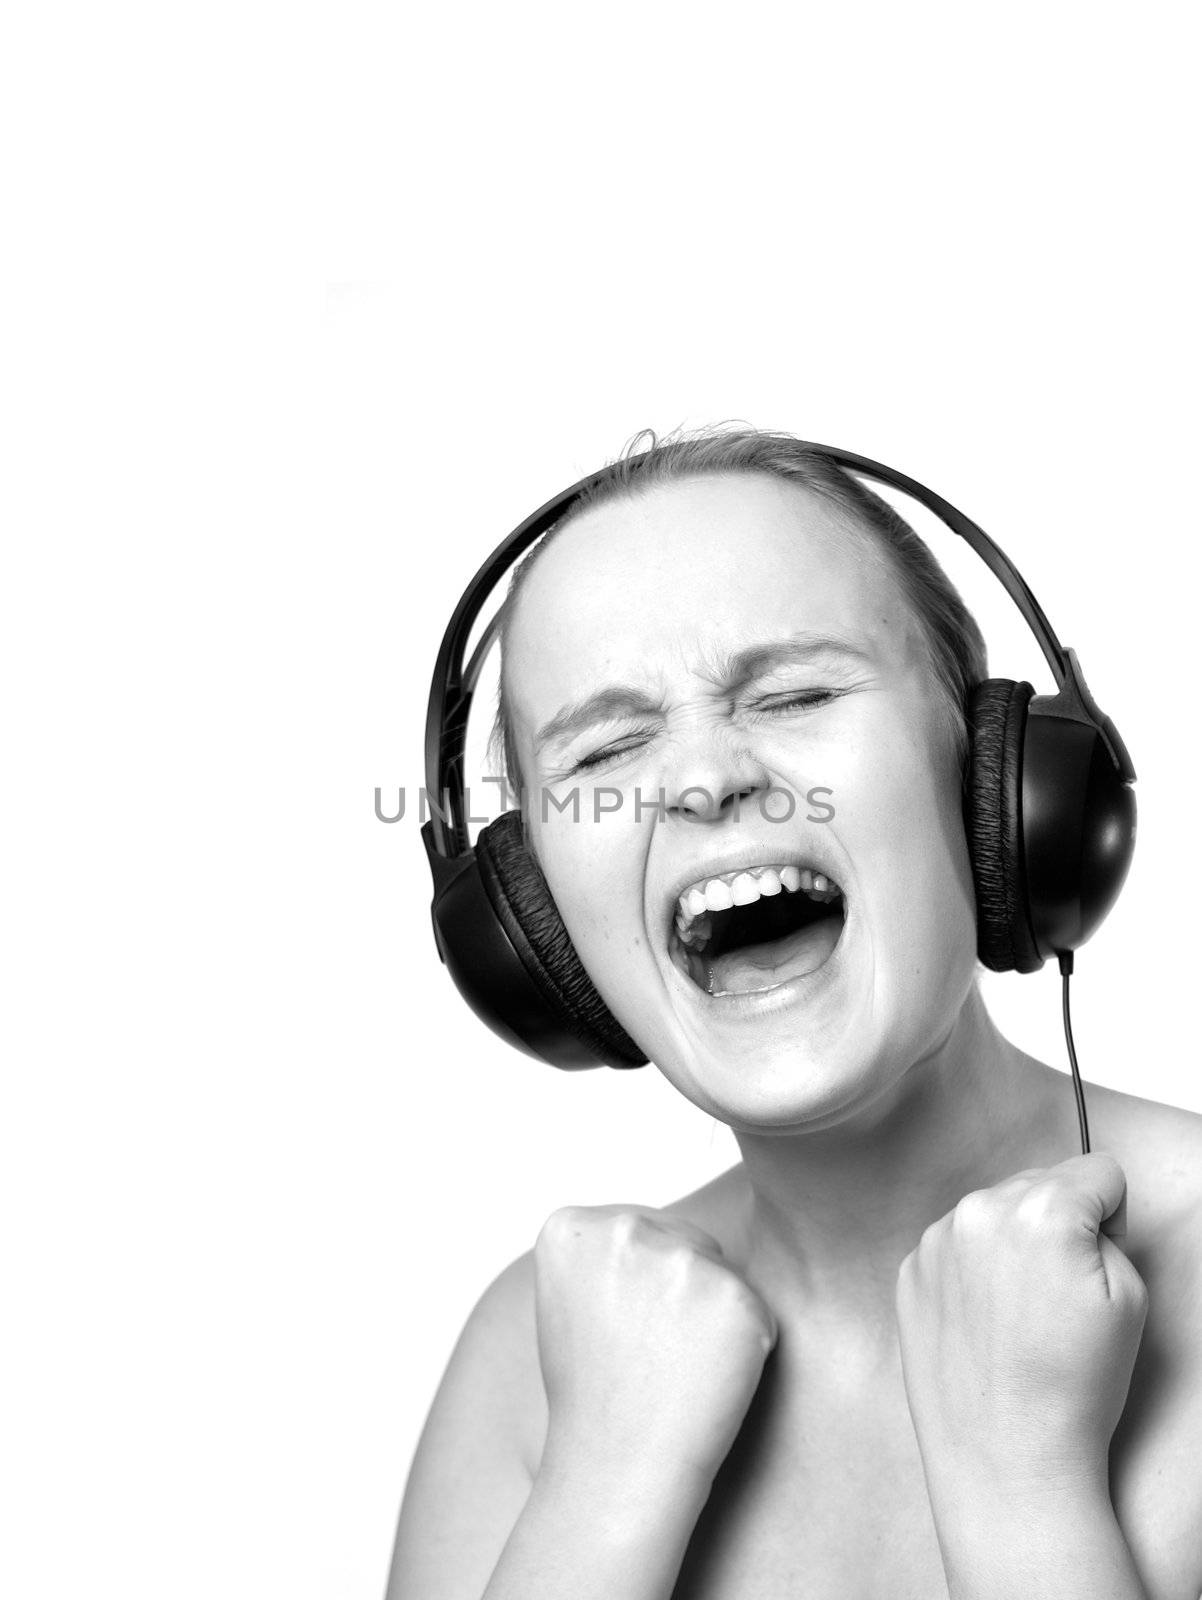 Girl in phoneheads is crying emotionally, isolated on white with extra copyspace for text, black&white.